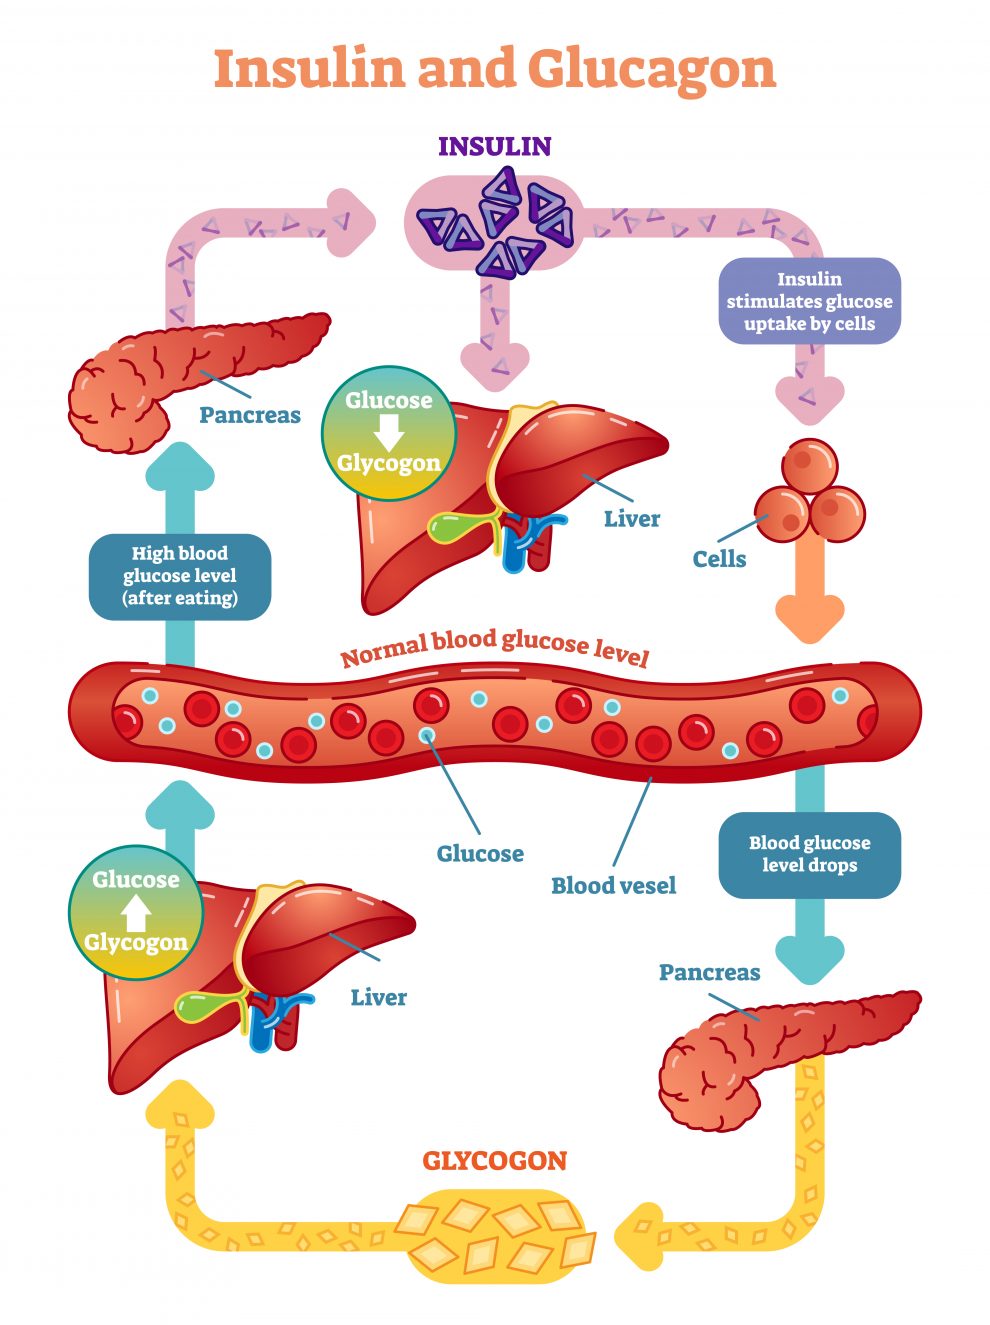 taurine effects on insulin absorption